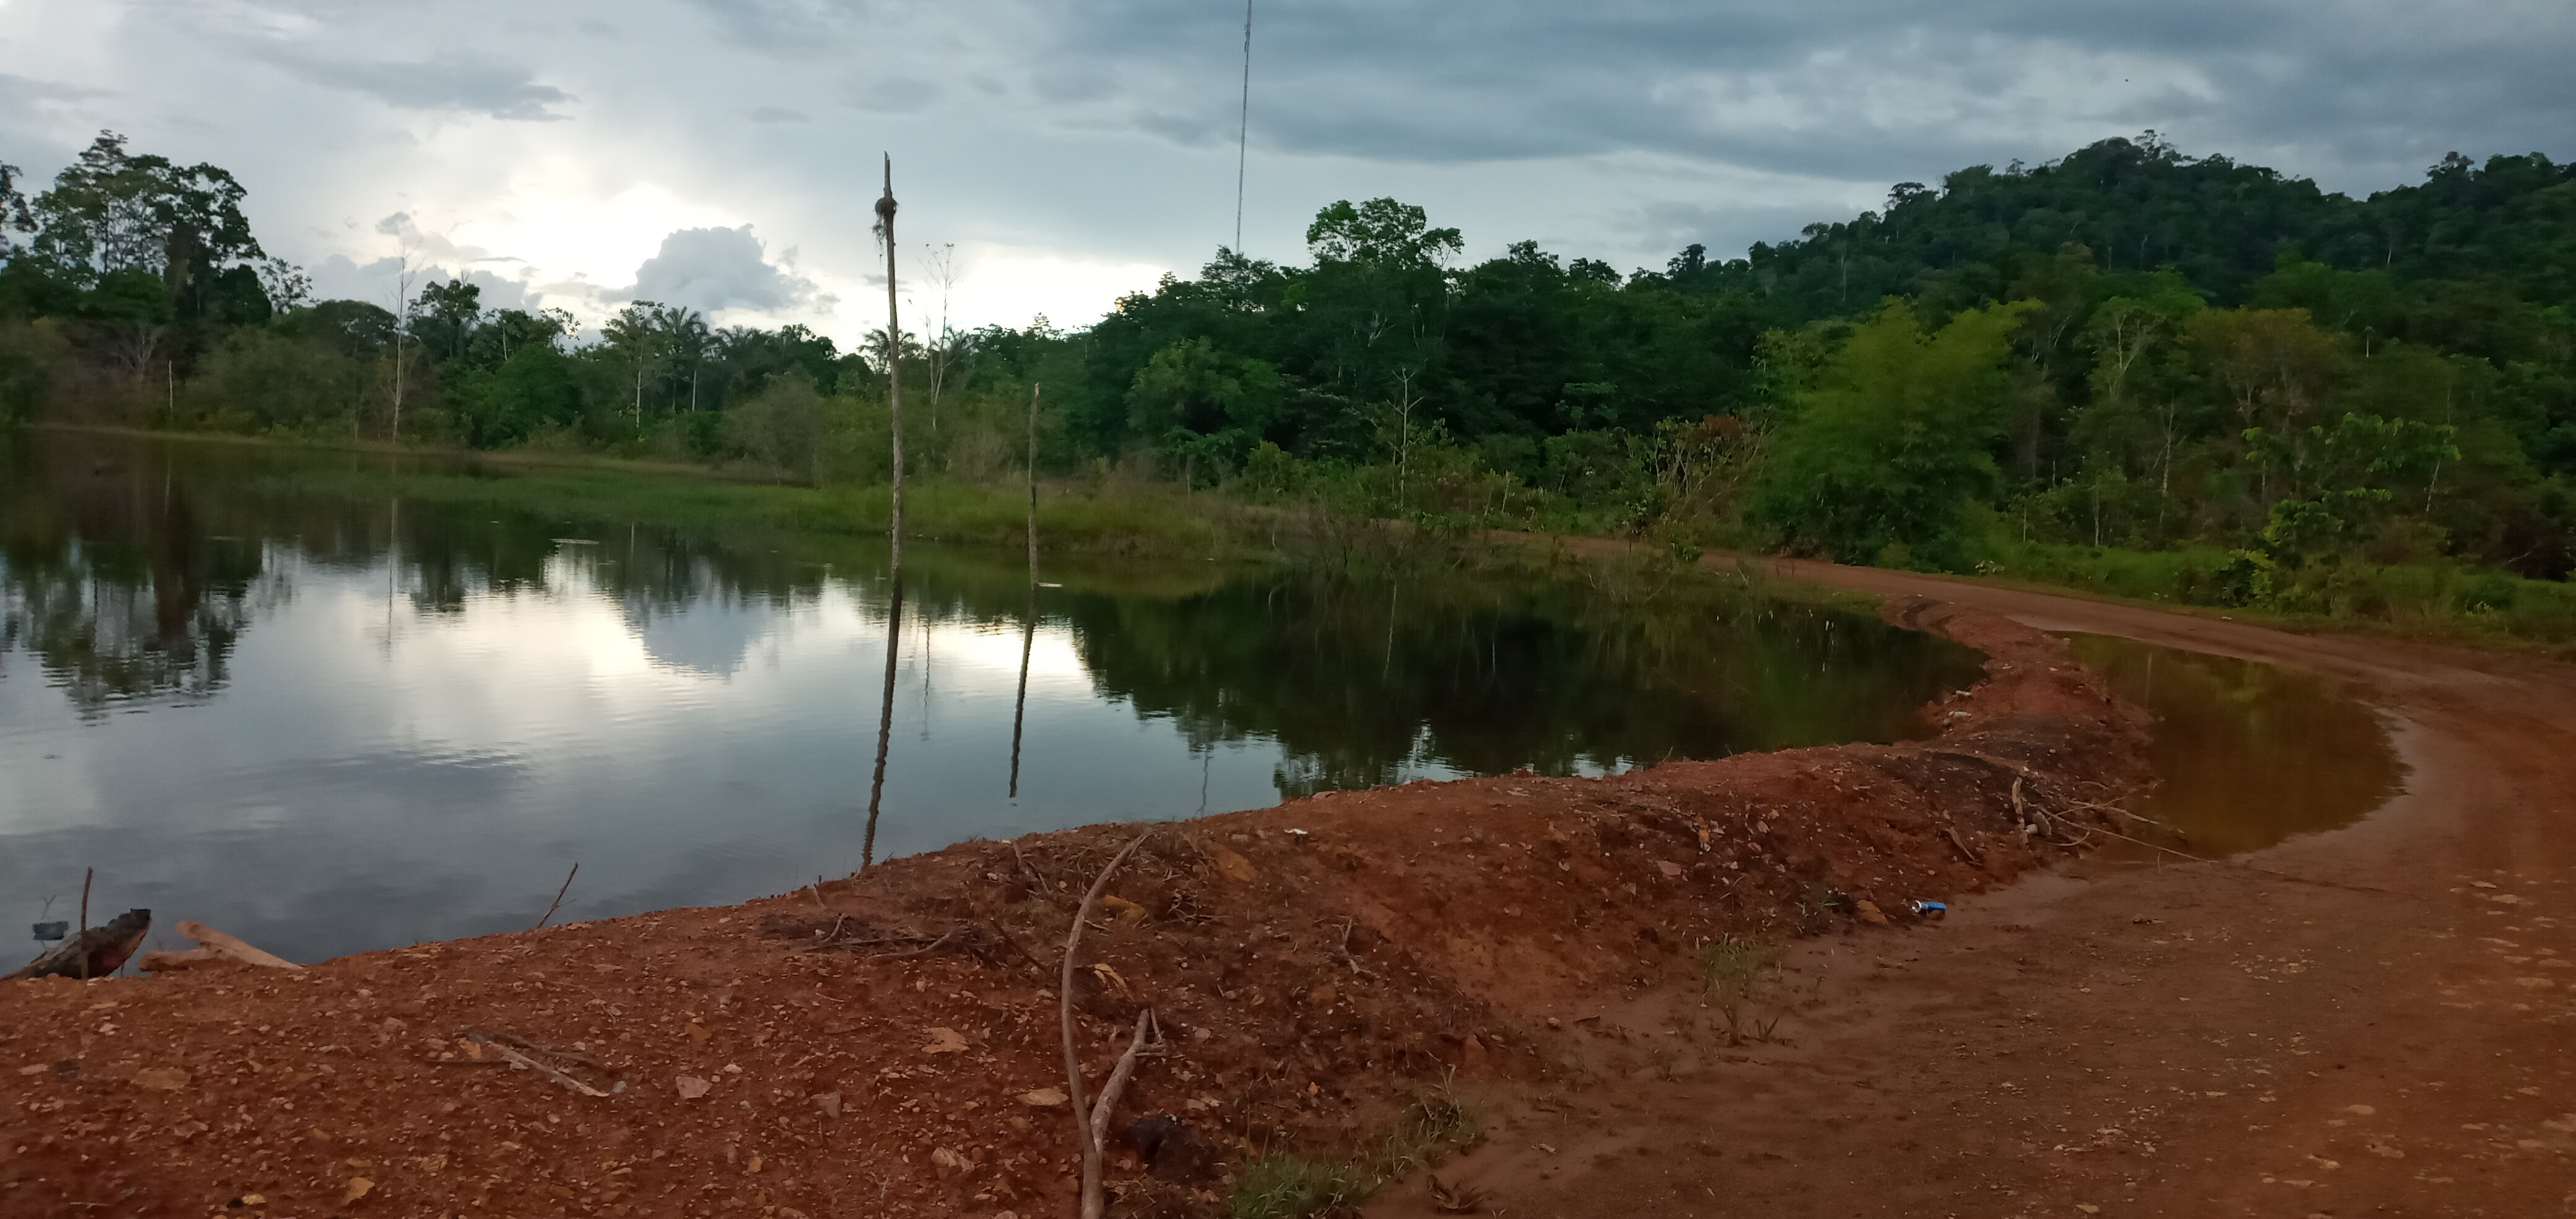 A water body with the land around it disturbed as a result of mining operations